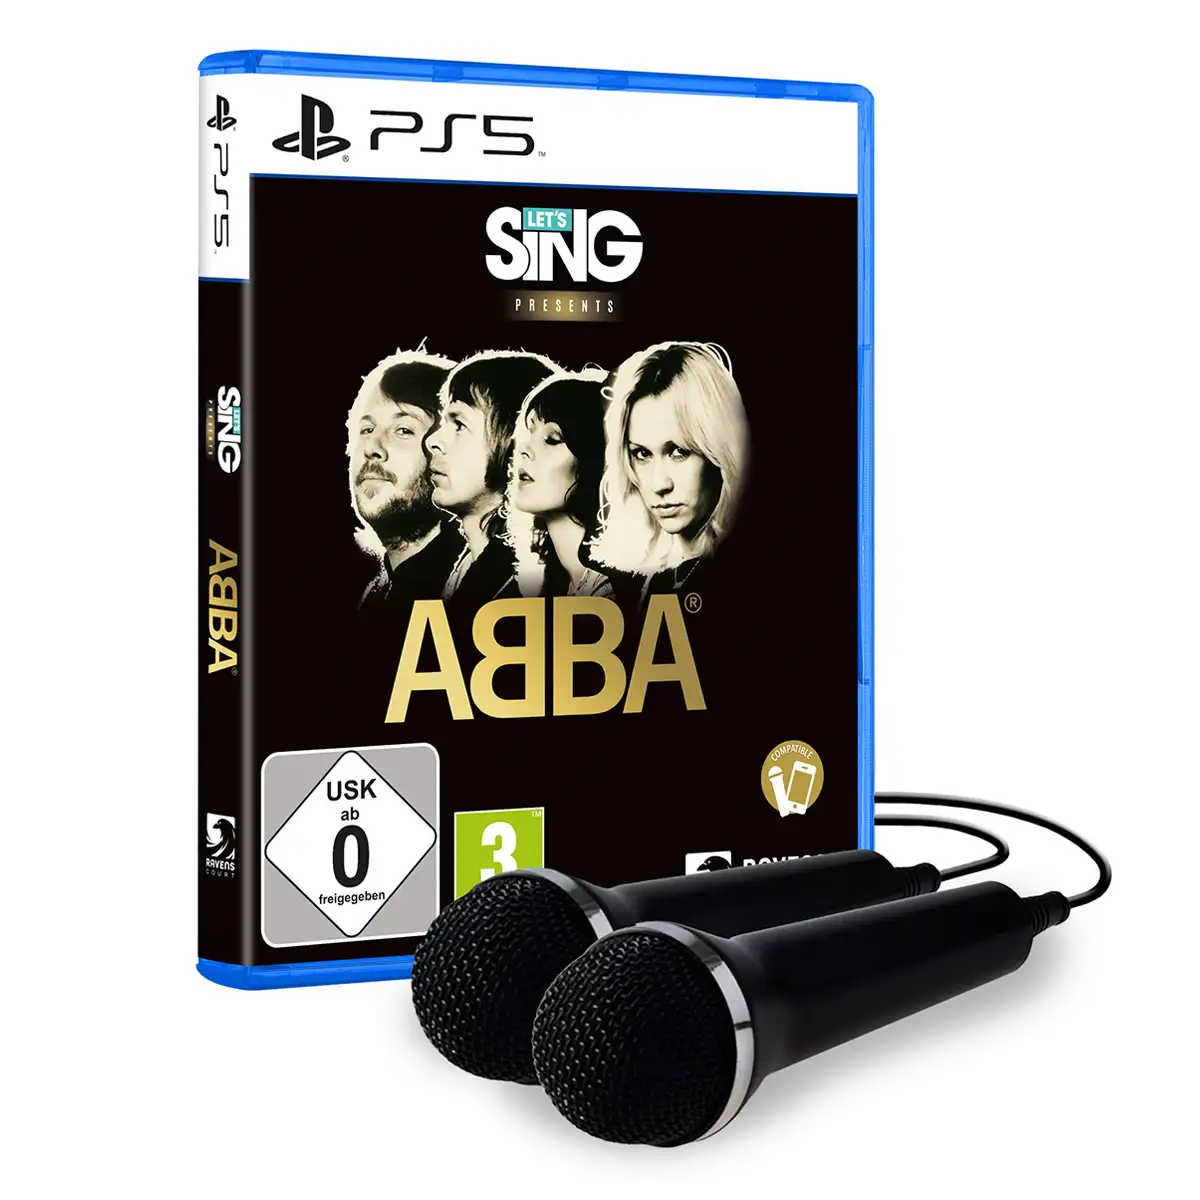 Let's Sing ABBA [+ 2 Mics] (PS5)